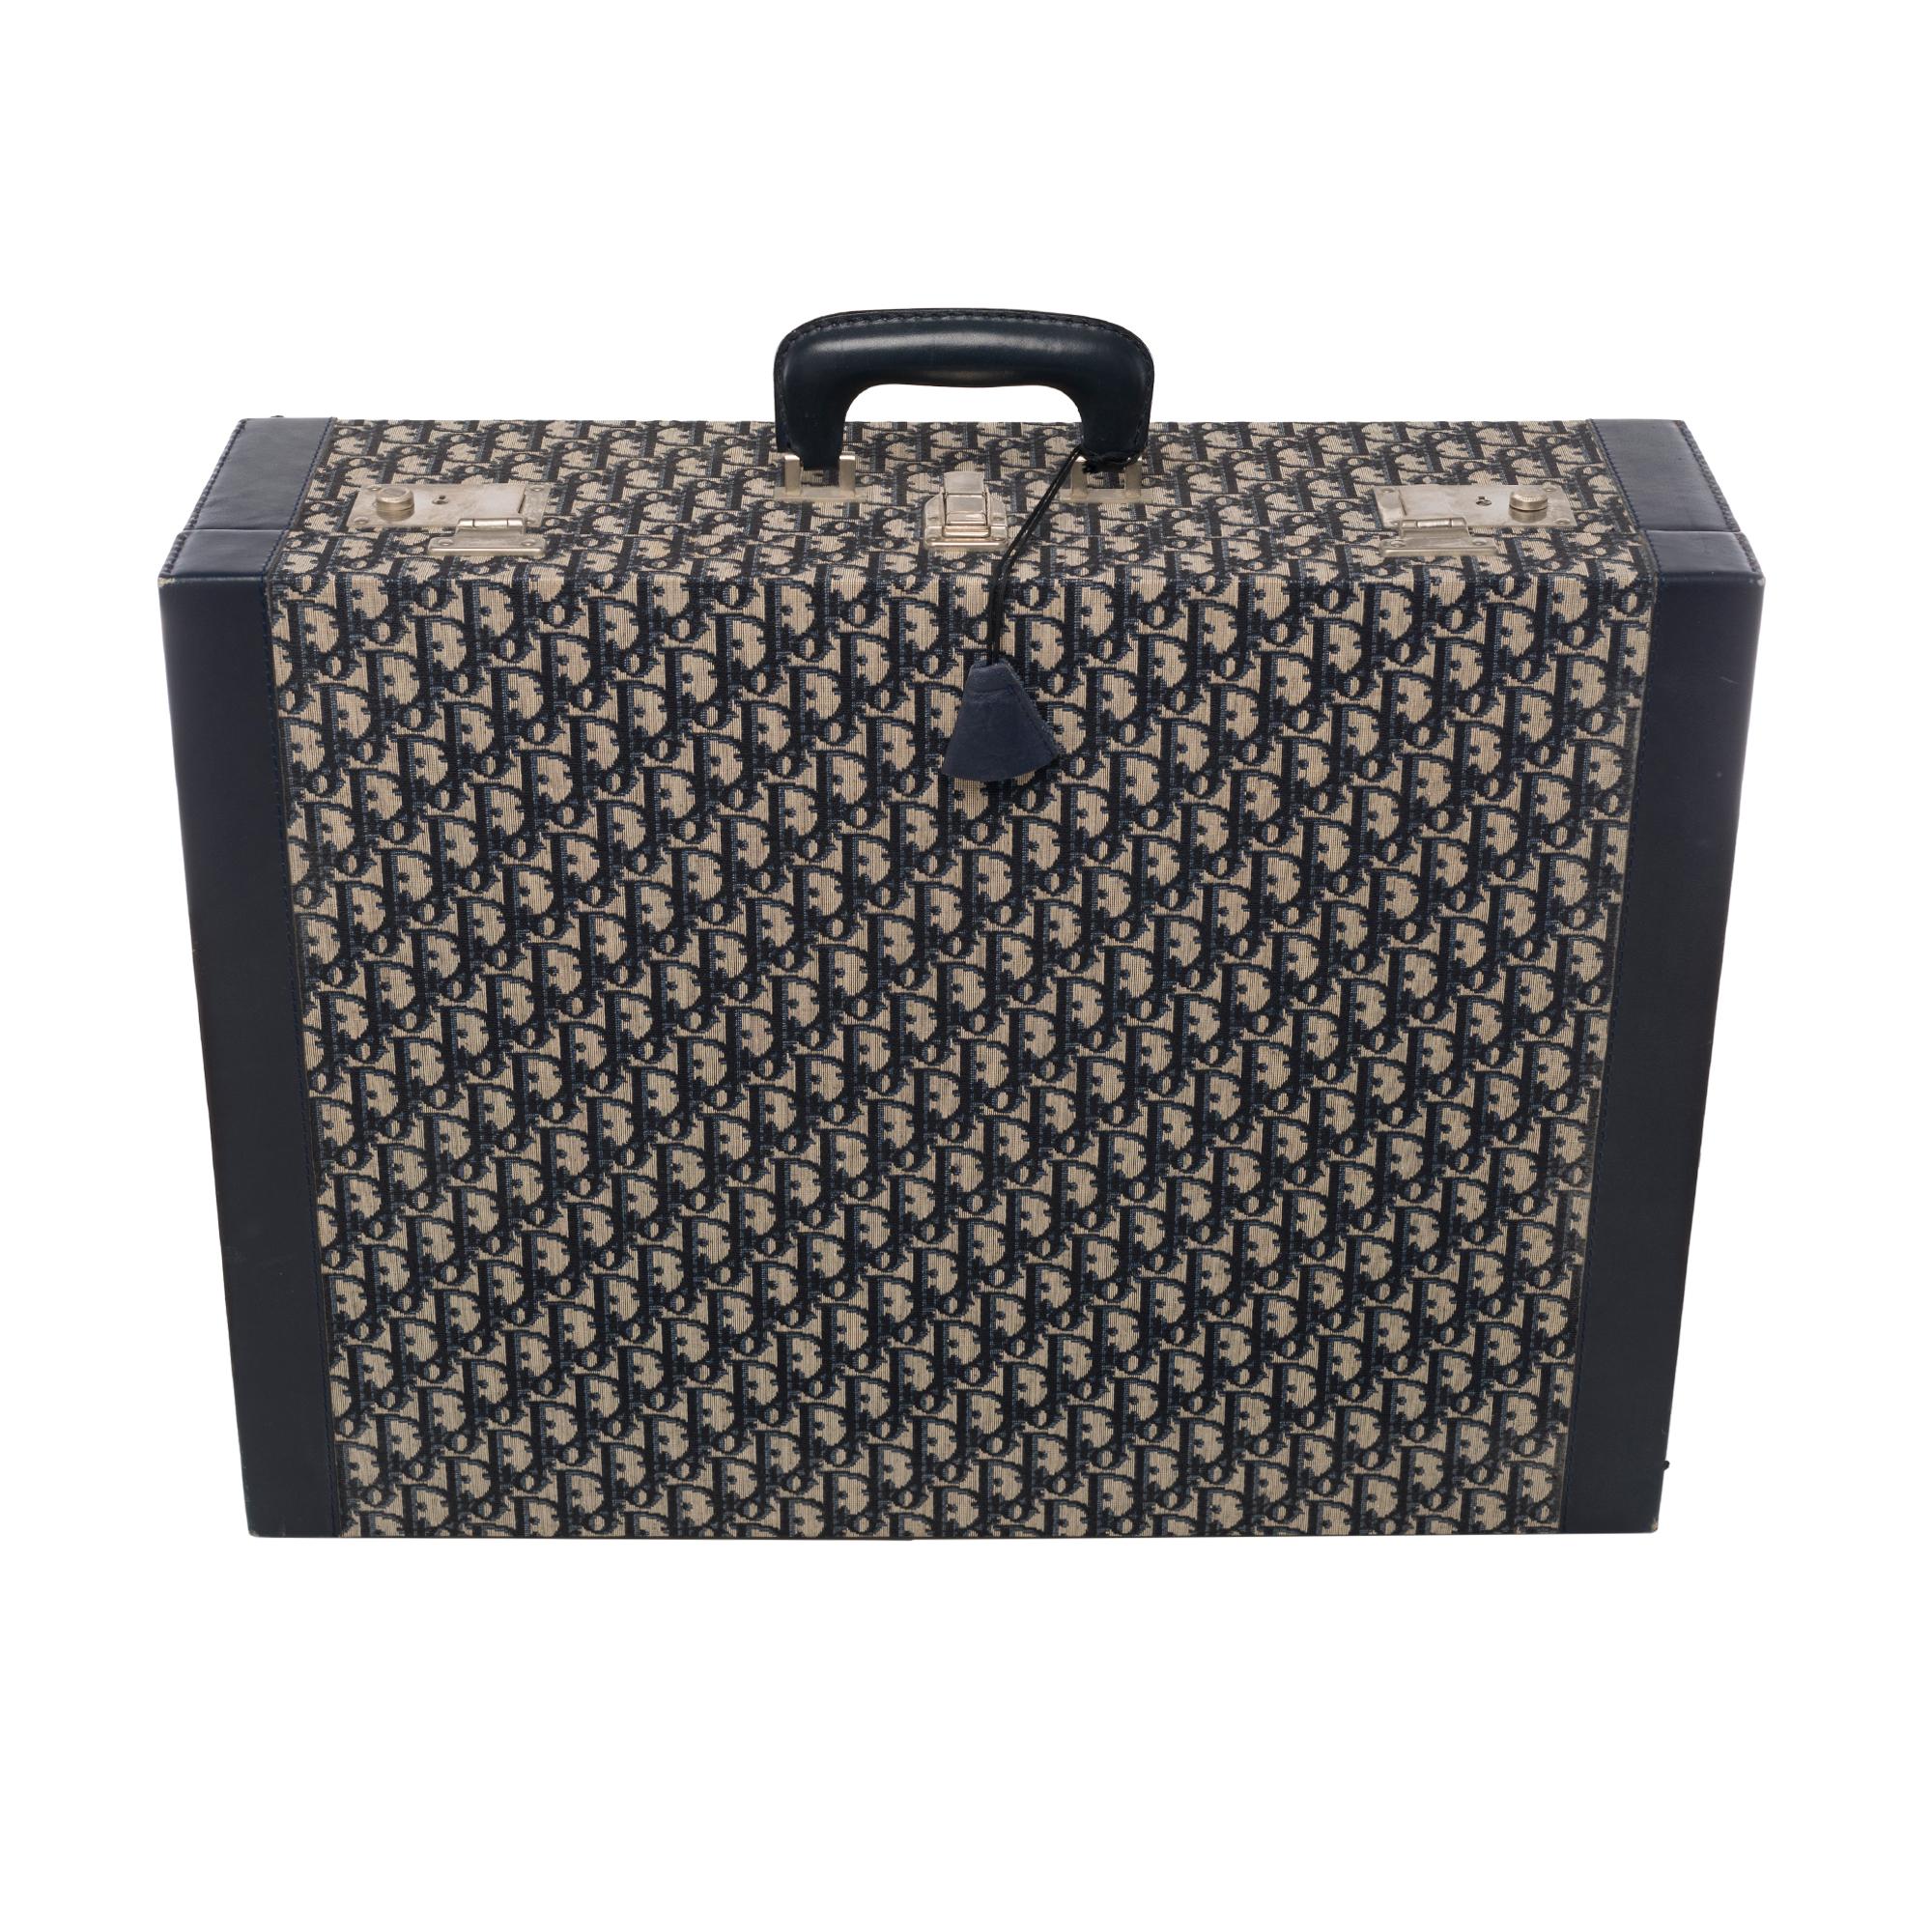 Vintage suitcase in oblique Dior canvas and navy leather, silver metal trim.
Handle in navy leather.
Interior in beige canvas.
Dimensions: 60 x 44 x 18cm.
Good vintage condition with usage marks on leather, canvas and hardware